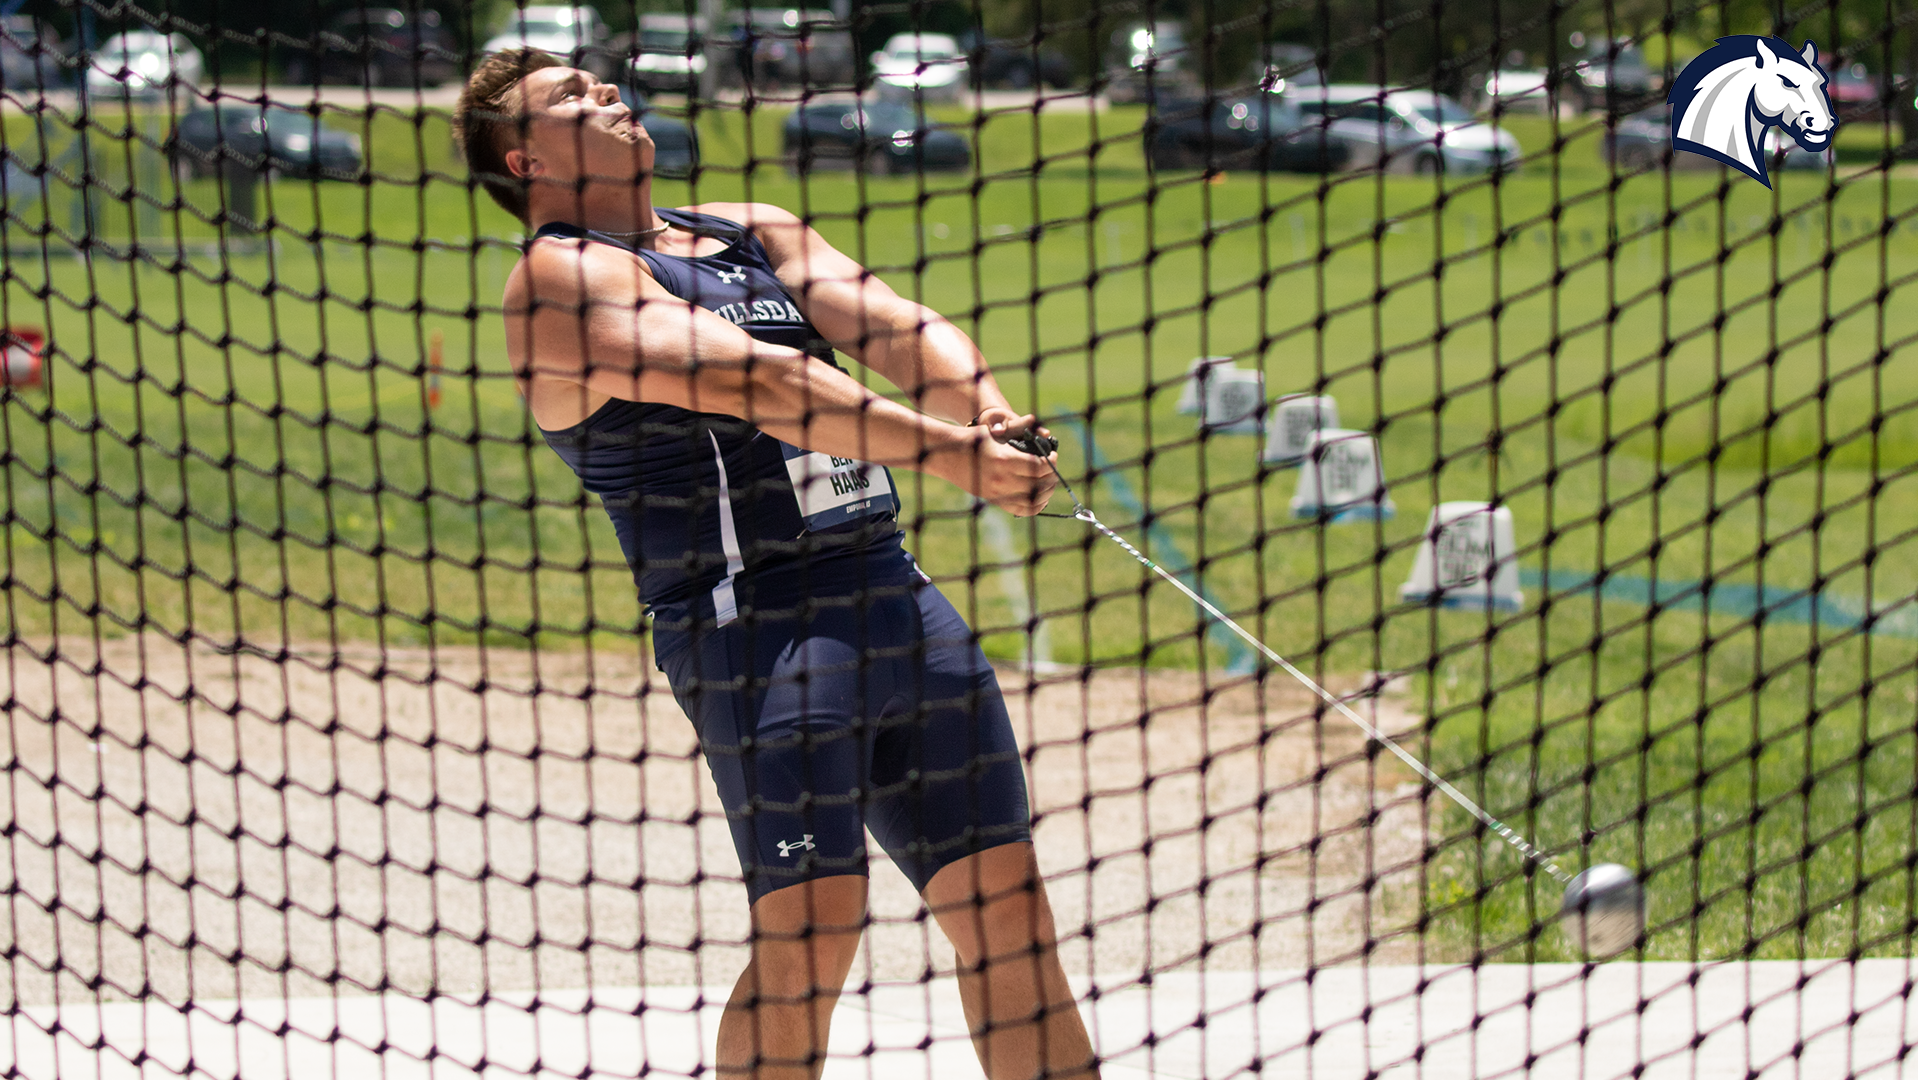 Haas captures first outdoor All-American honor as Chargers complete day 1 of NCAA Outdoor Championships